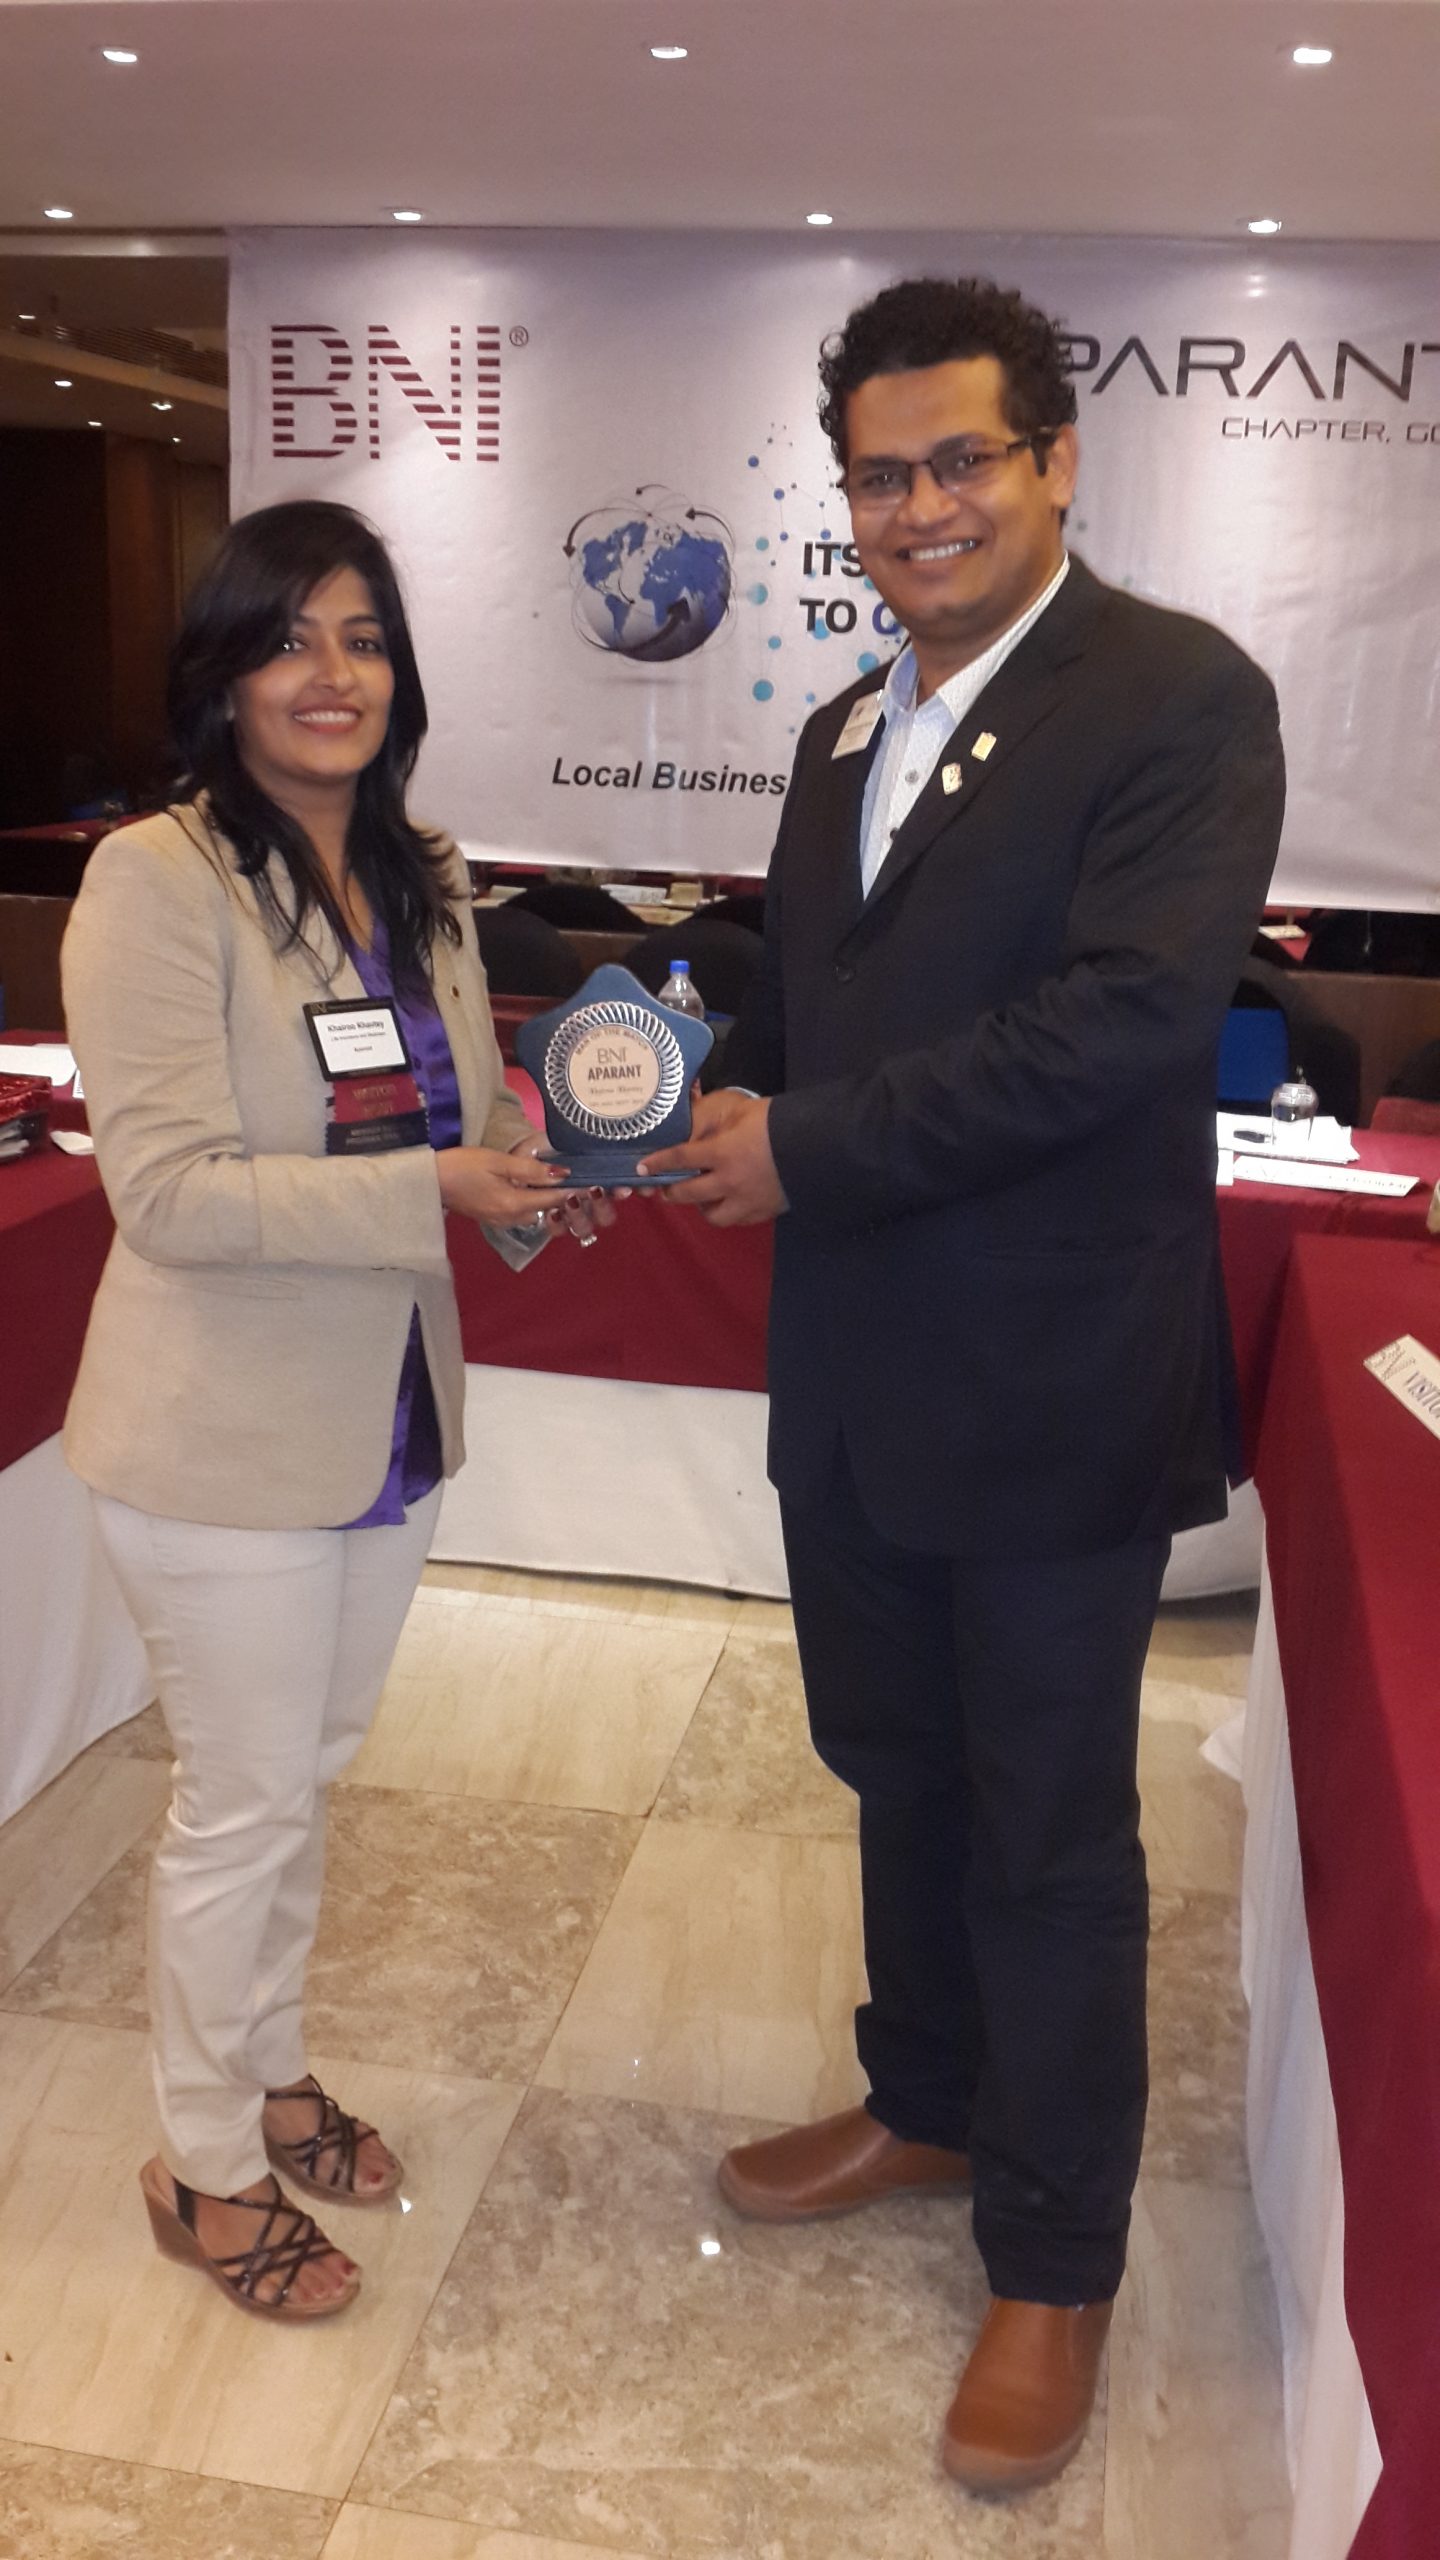 Felicitated as the best LVH at BNI APARANT in the year 2013